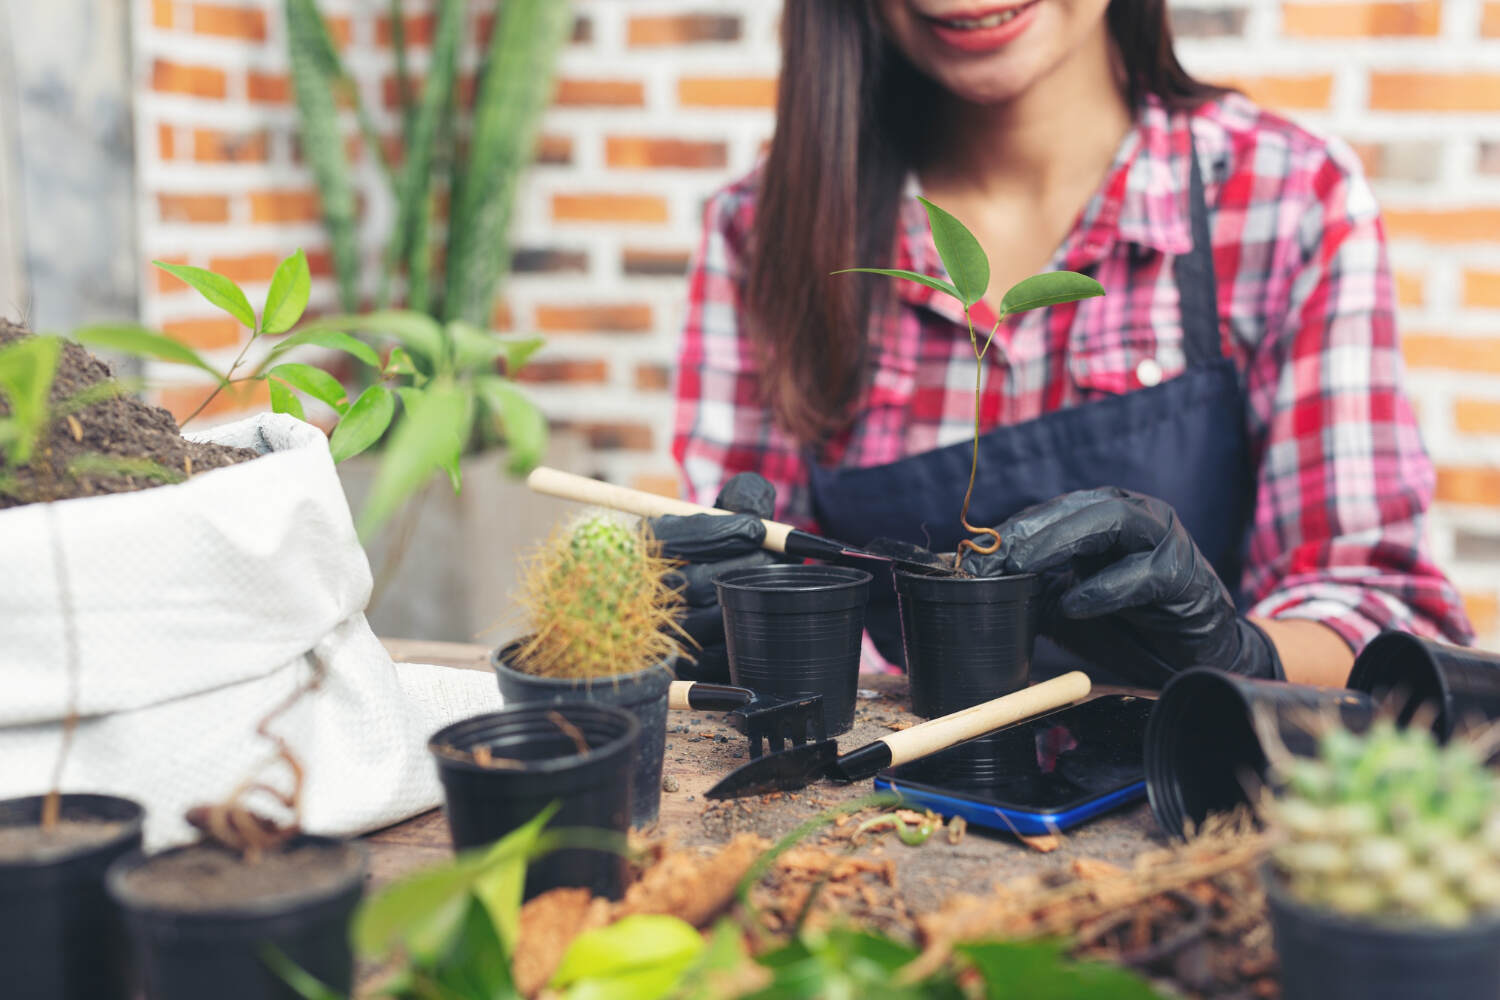 Therapeutic Aspects of Gardening as a Hobby